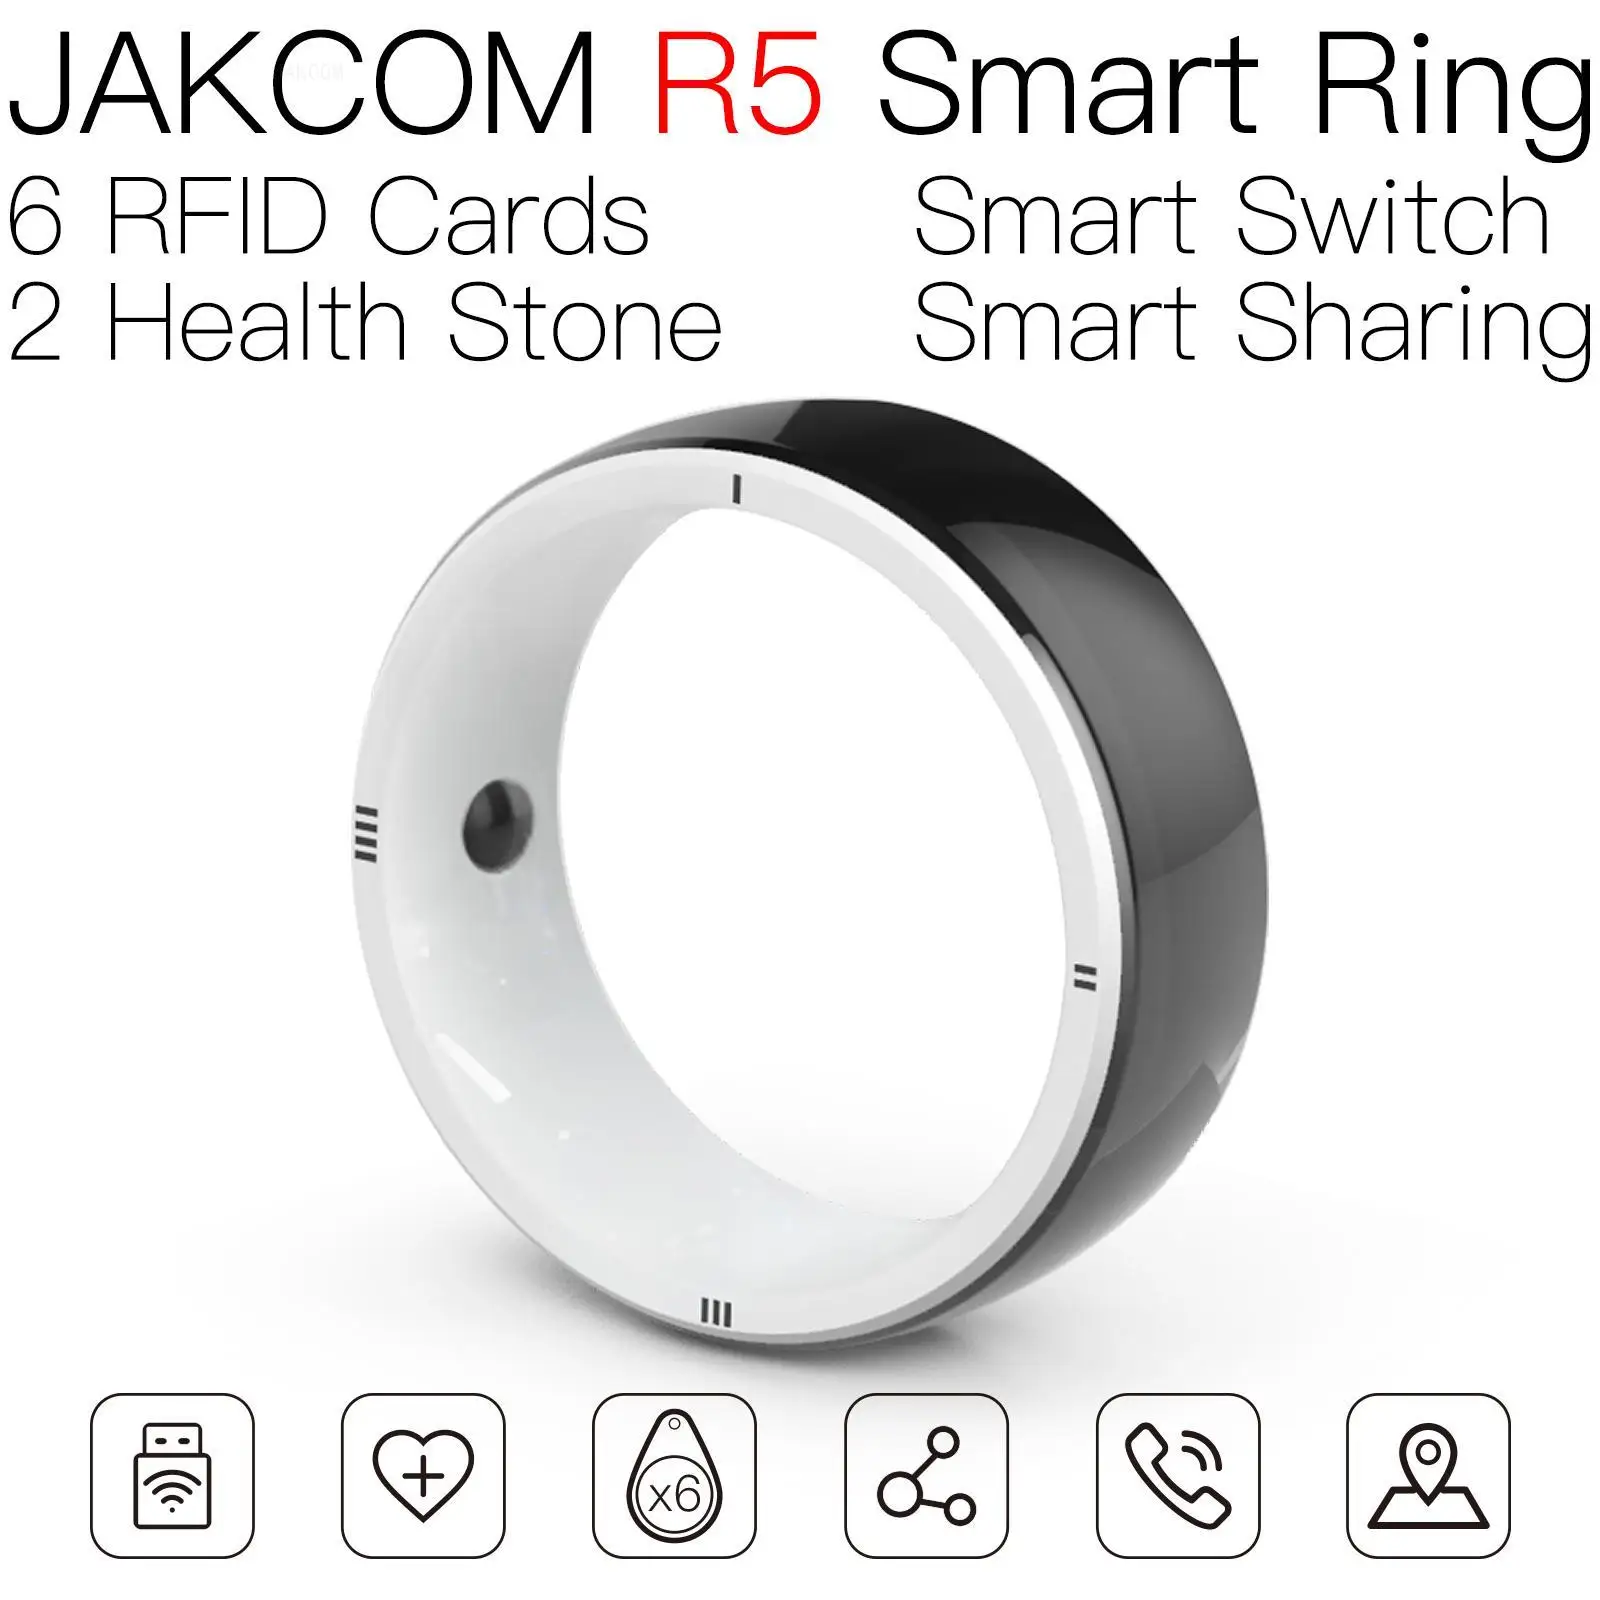 

JAKCOM R5 Smart Ring Nice than tag rfid uhf passive tags vehiculo cell 5g nfc warranty one year emulator black metal android